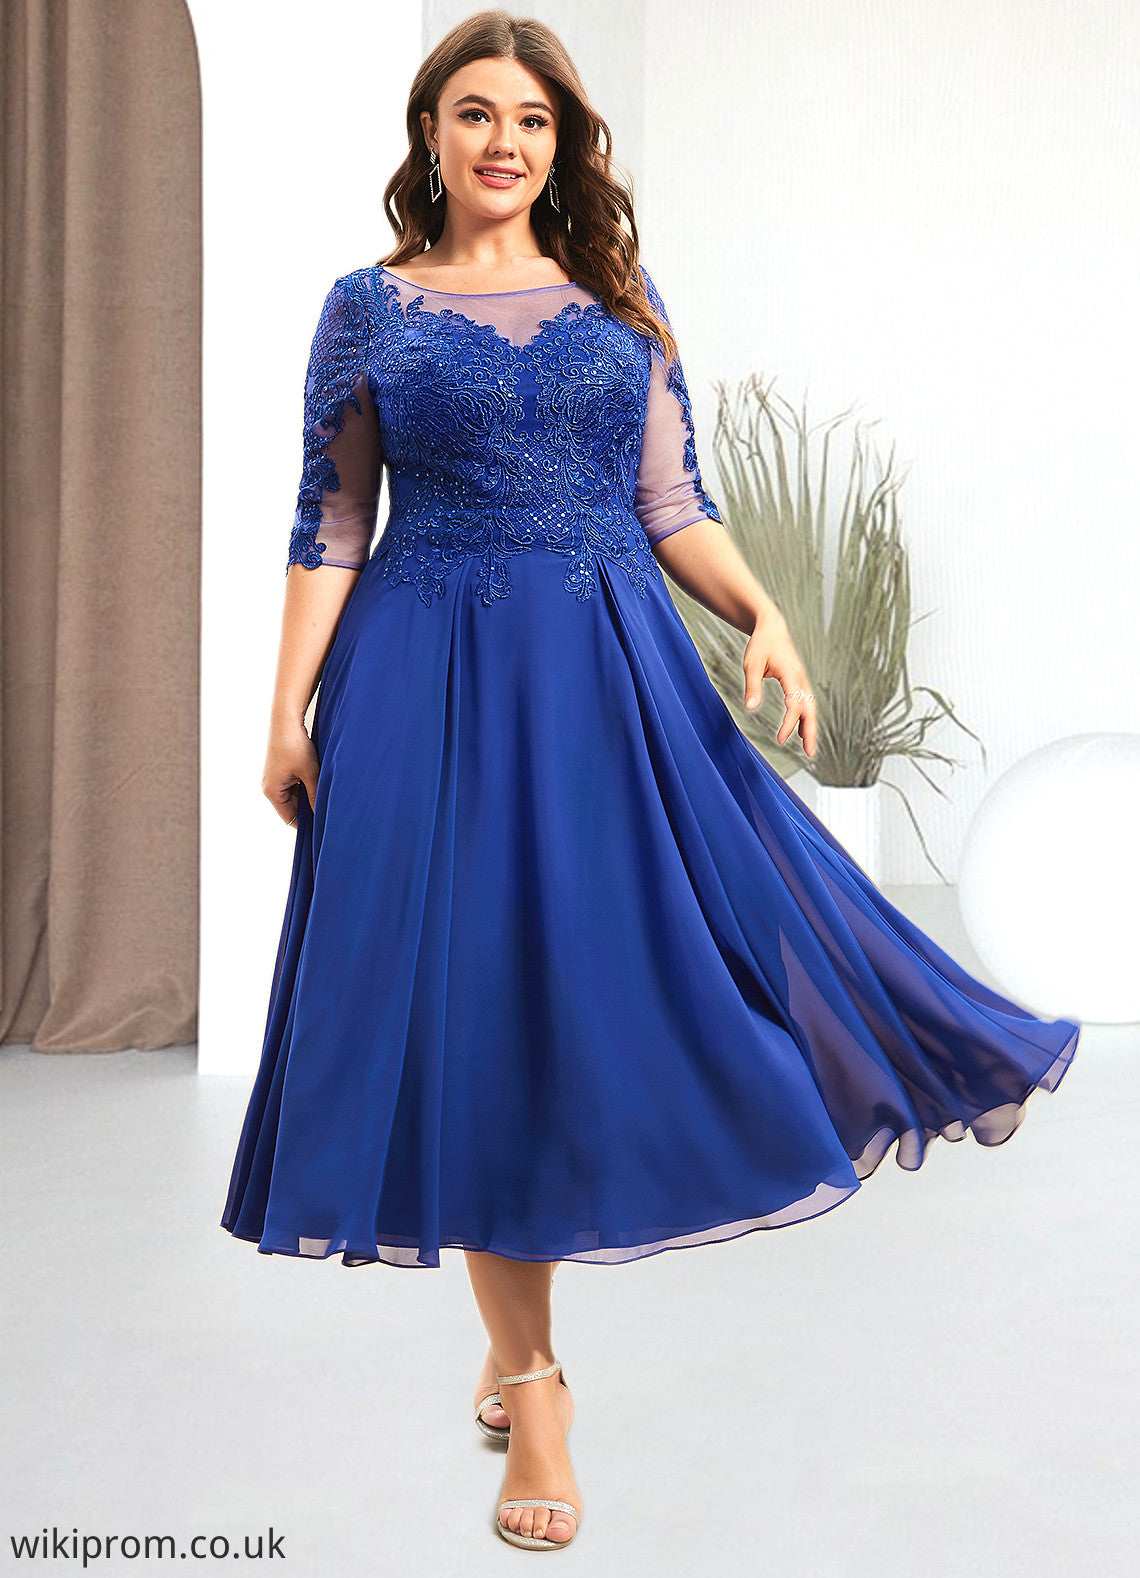 Claire A-Line Scoop Neck Tea-Length Chiffon Lace Mother of the Bride Dress With Sequins SWK126P0014565